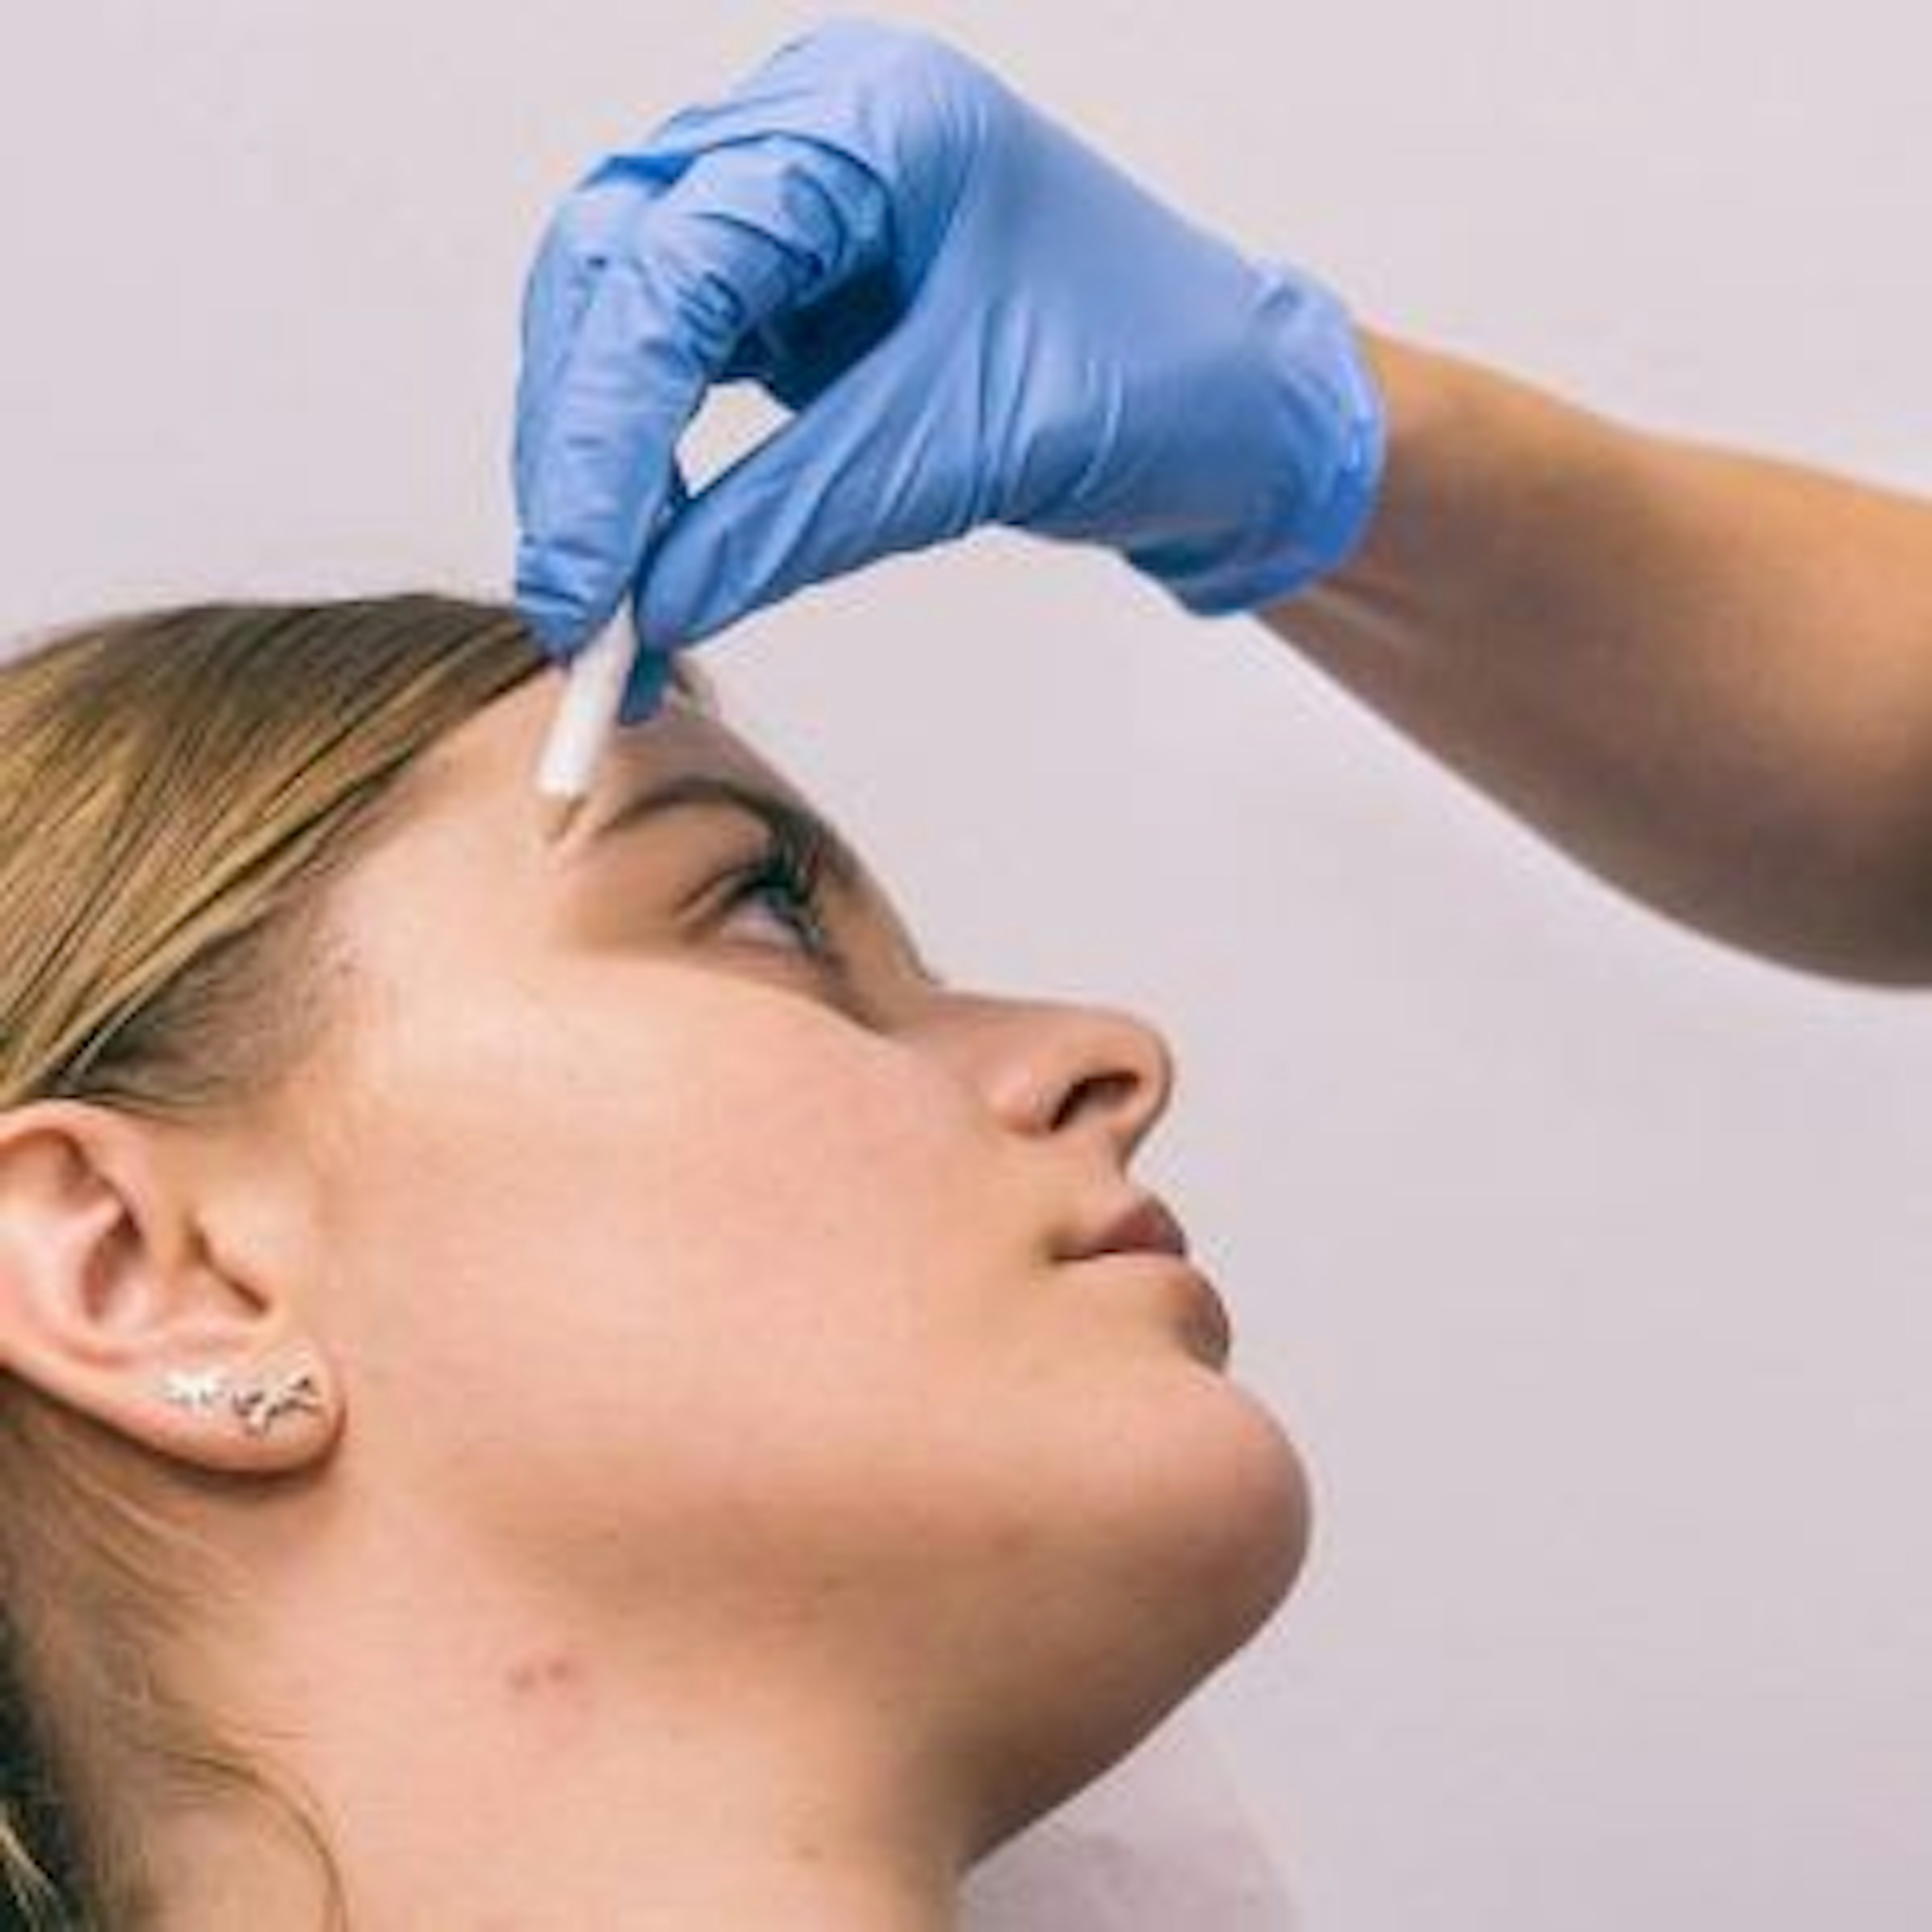 3 Common Mistakes When Injecting Botulinum Toxin